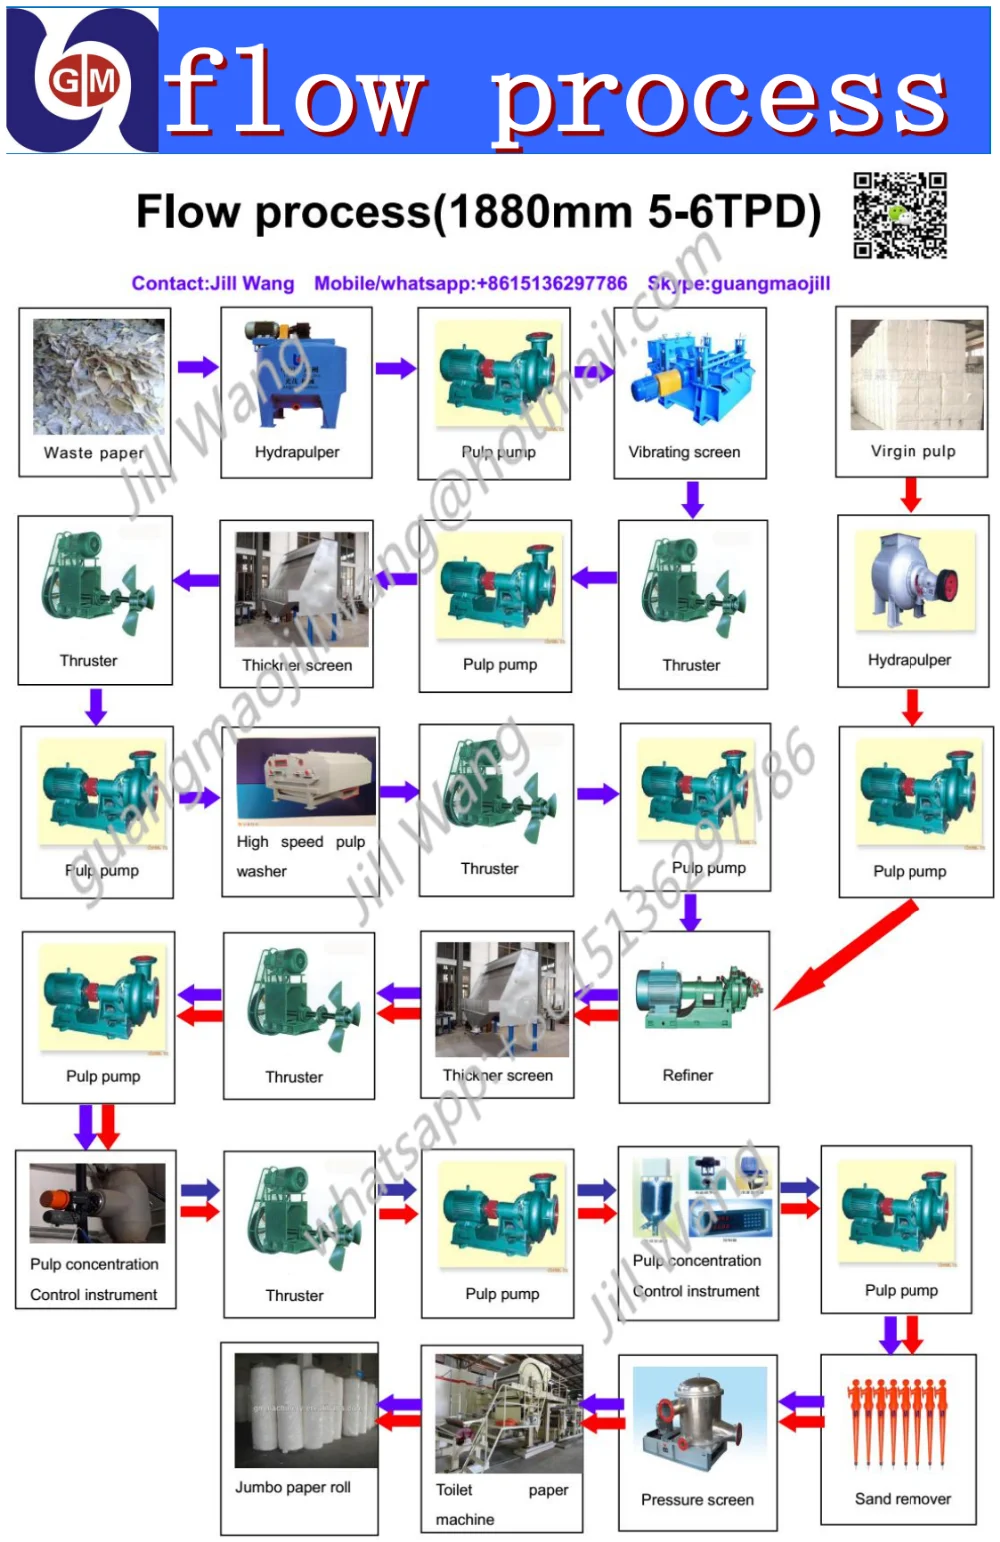 work instructions for manufacturing process pdf